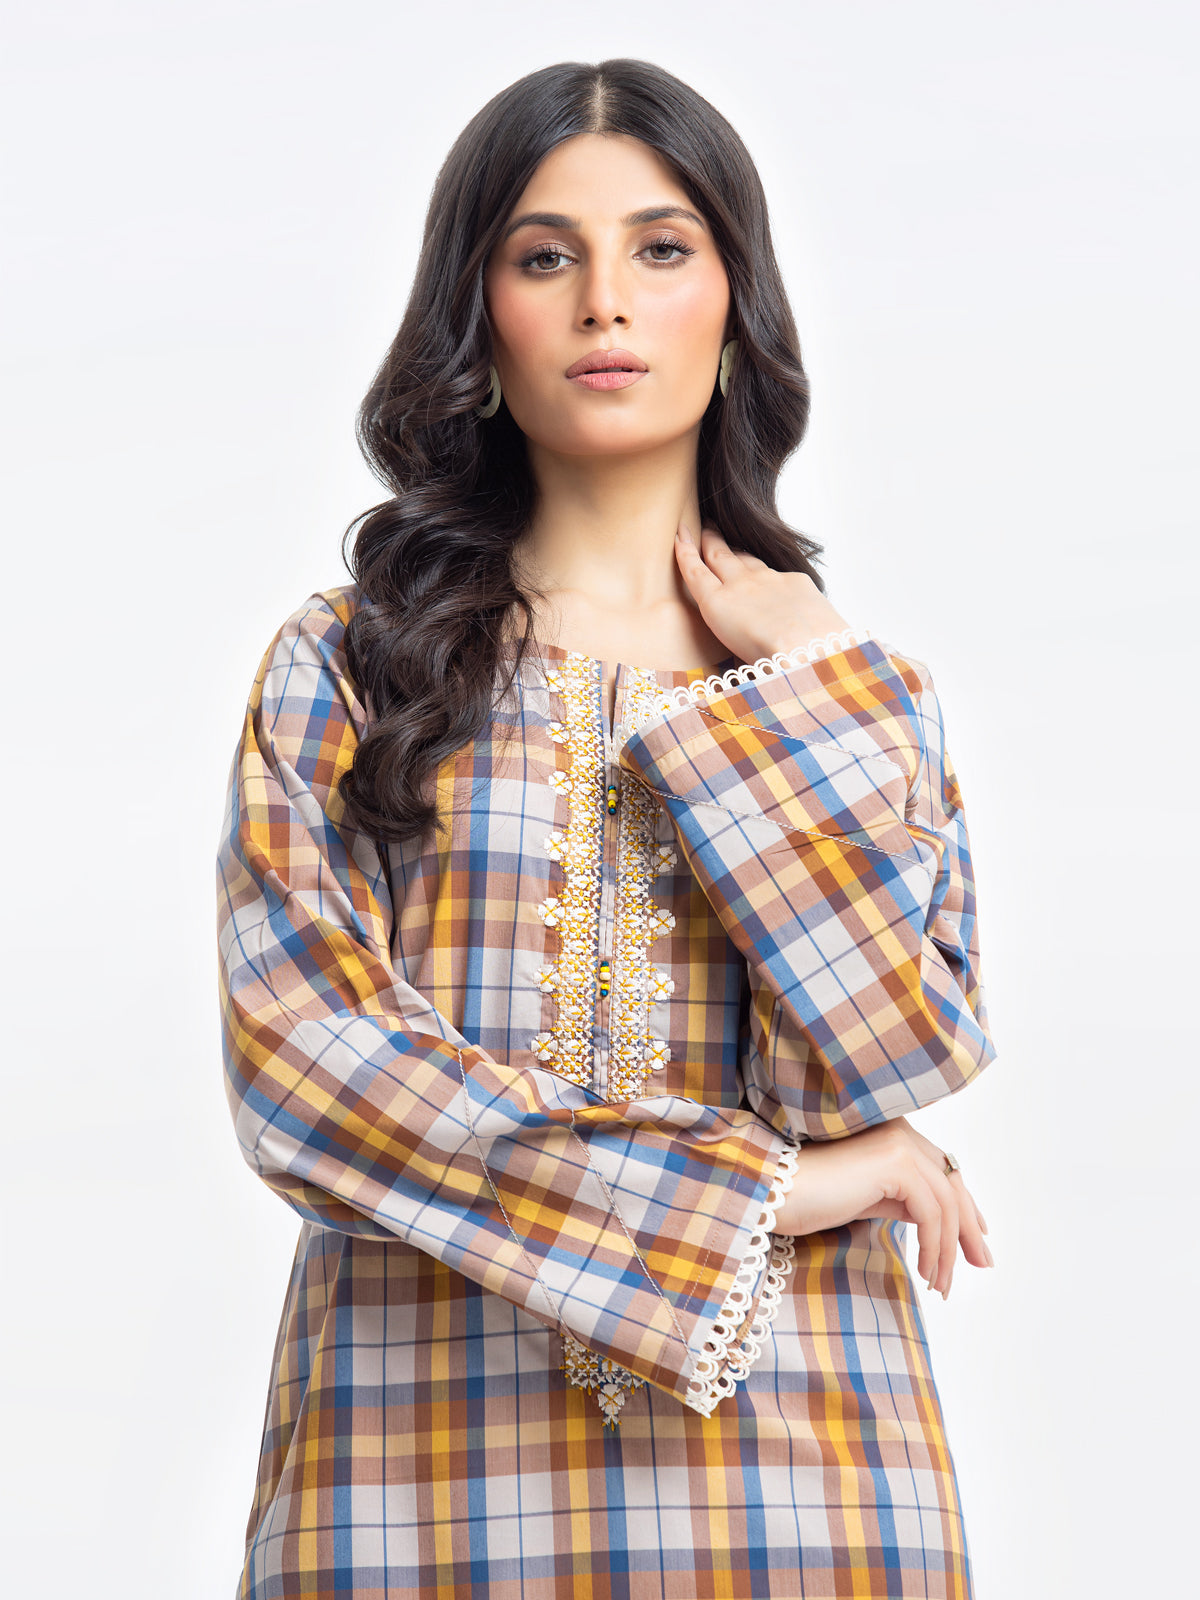 Pret 1Pc Embroidered Cotton Shirt - A-WPE1S23-436